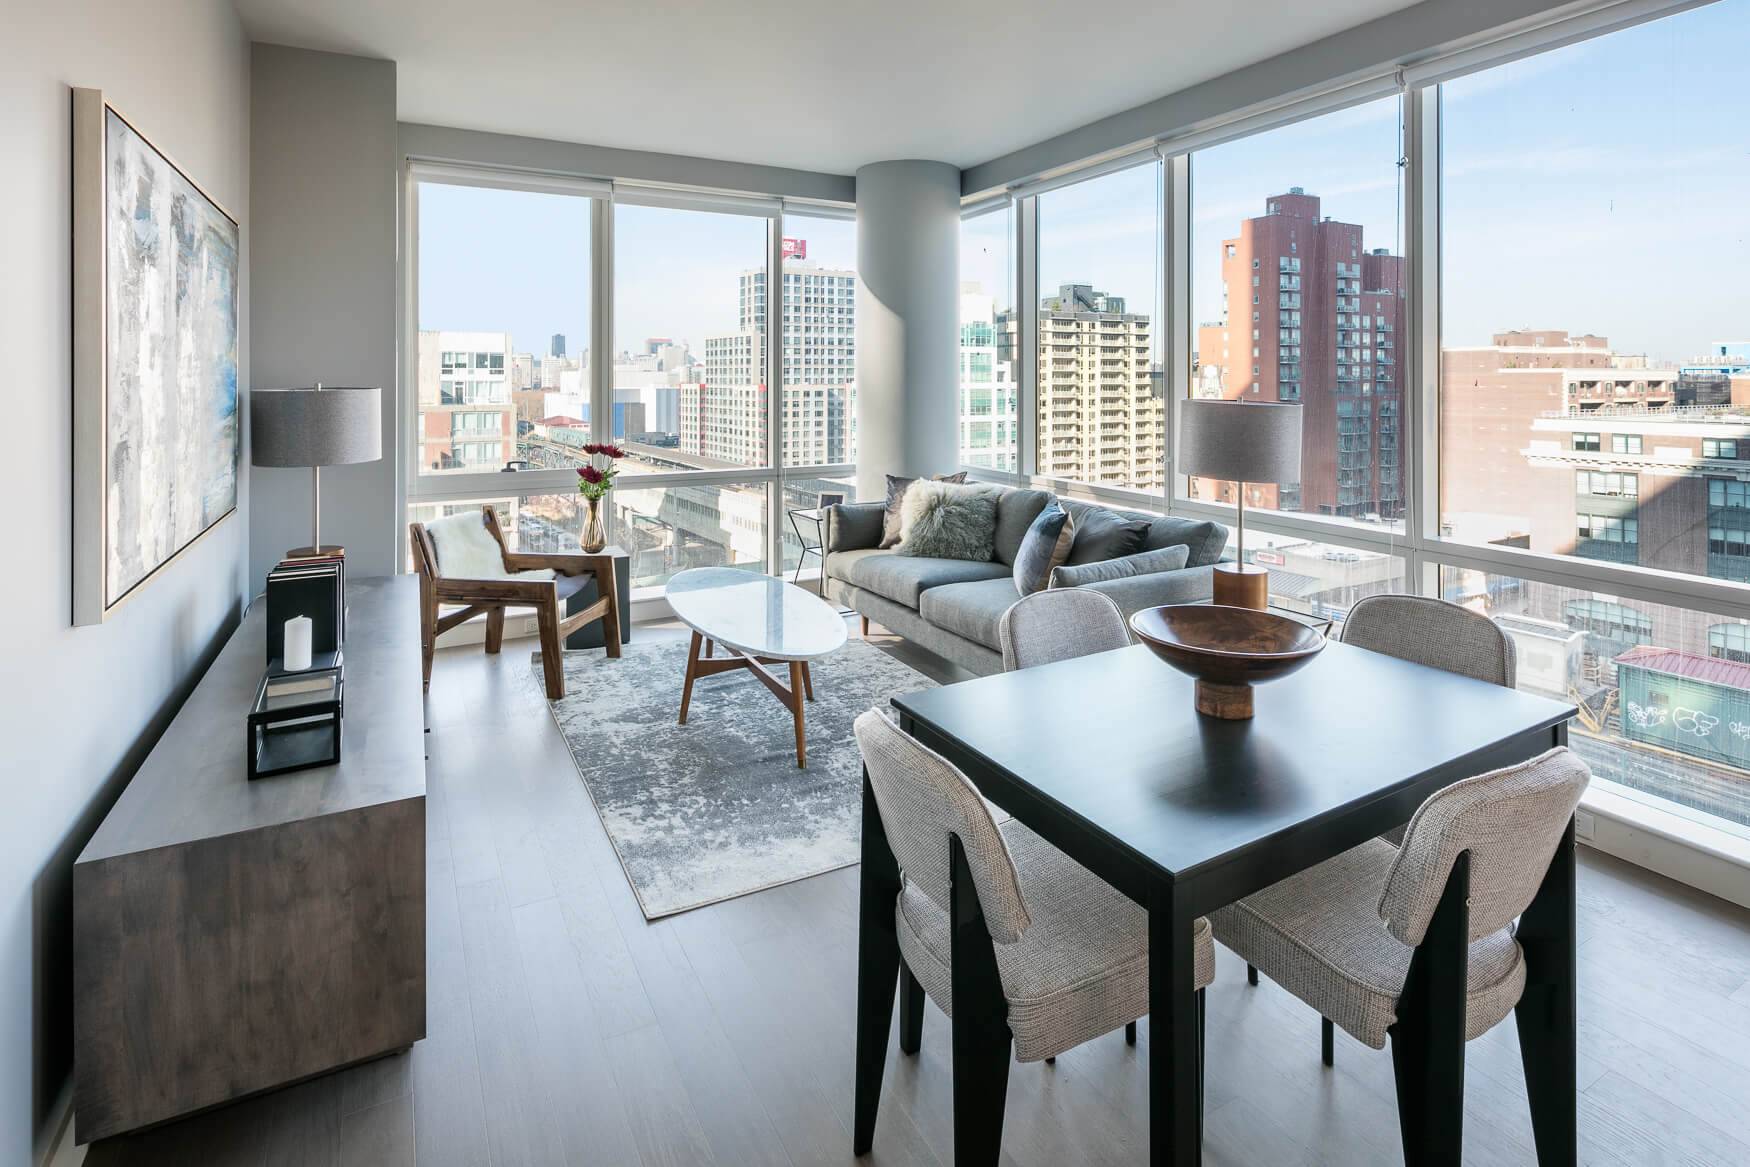 3 Months Free Rent!!!  Limited Time Only!!!   Luxurious Long Island City 2 Bedroom Apartment with 2 Baths featuring a Rooftop Deck and Fitness Center